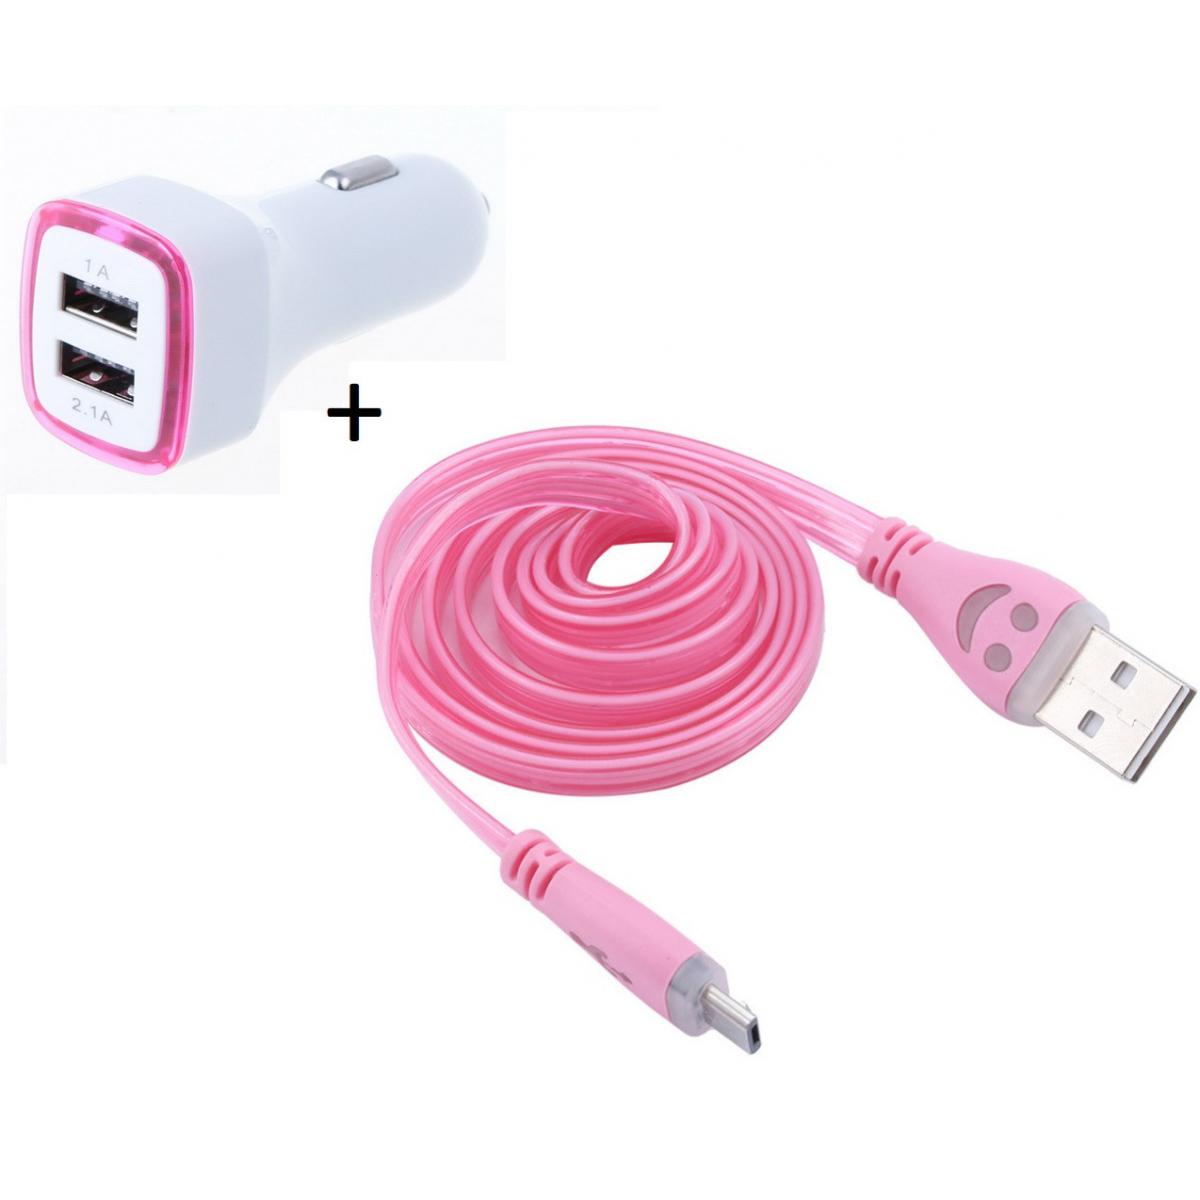 Shot - Pack Chargeur Voiture pour WIKO Y80 Smartphone Micro USB (Cable Smiley + Double Adaptateur LED Allume Cigare) (ROSE) - Chargeur Voiture 12V